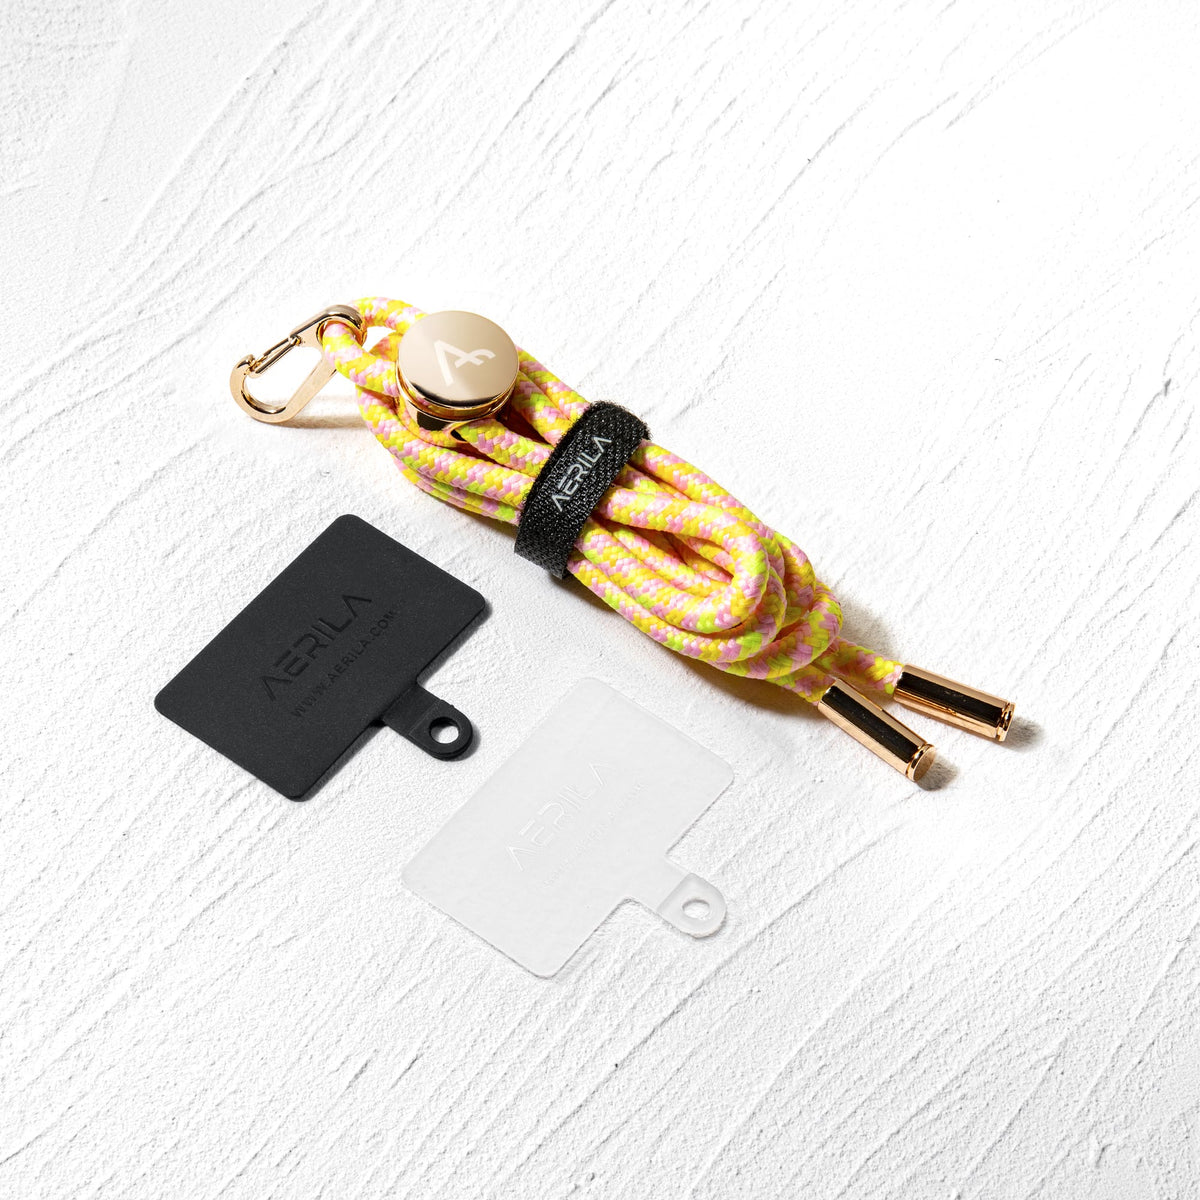 NORE Phone Lanyard set with Connector Patch Card | FIESTA Collection - AERILA